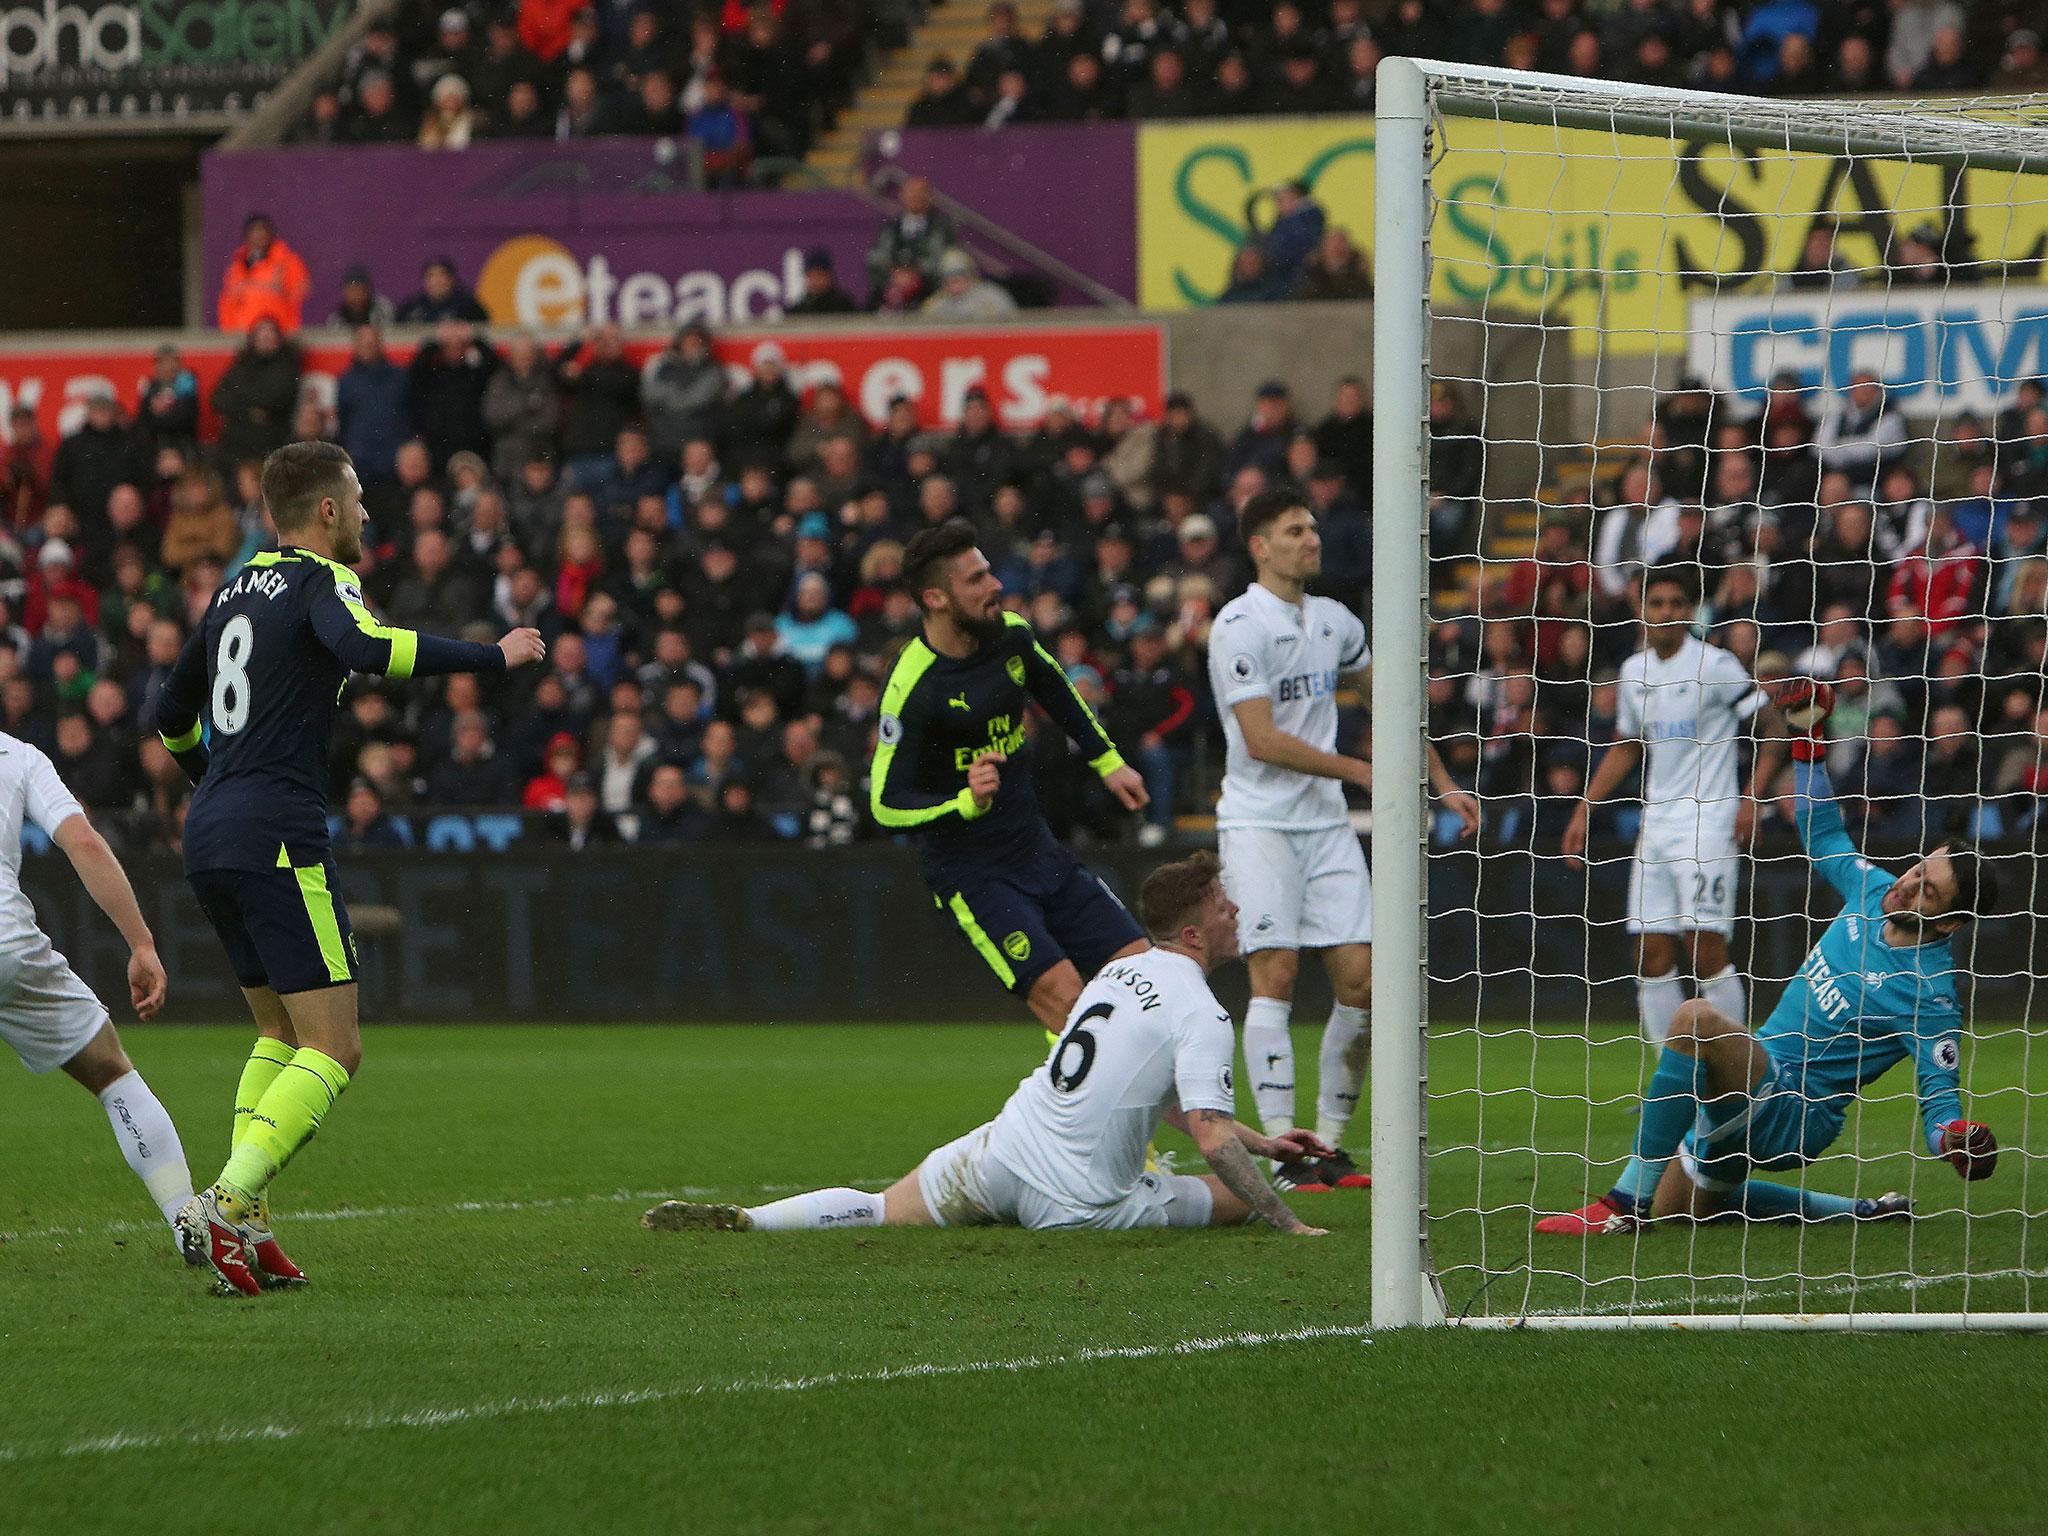 Olivier Giroud scores Arsenal's first goal against Swansea and sets them on their way